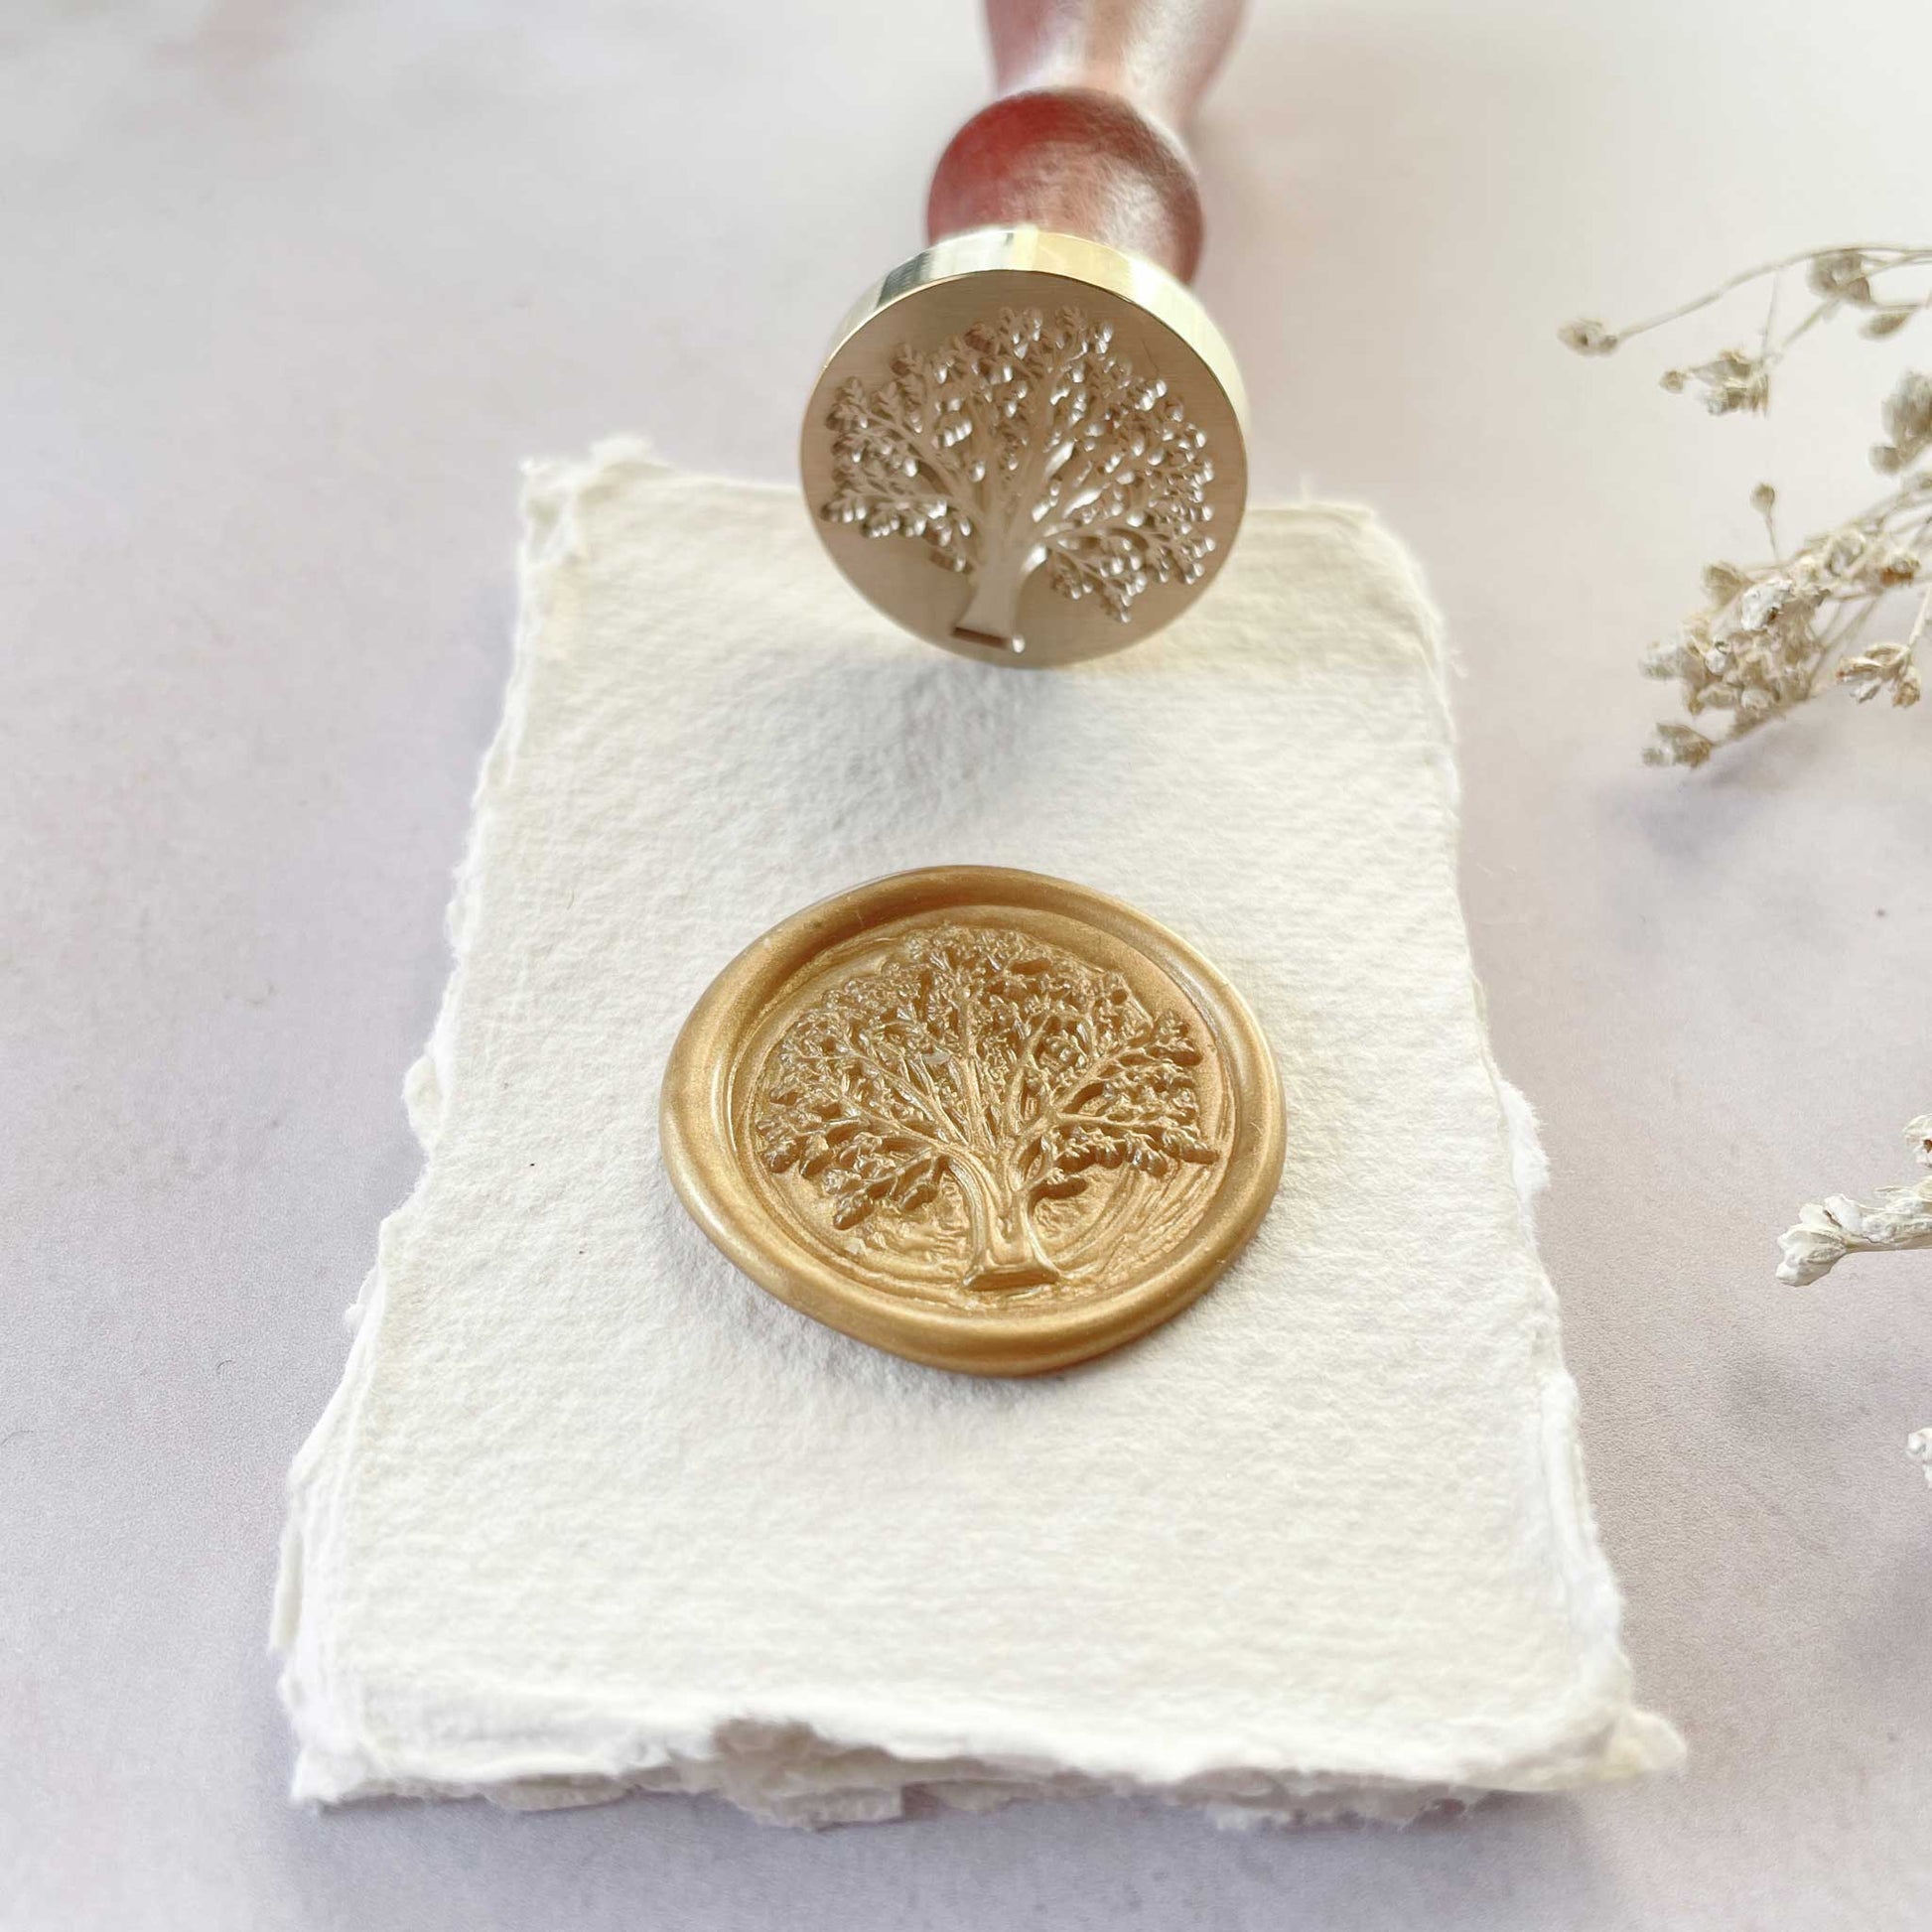 Tree of Life Wax Stamp.  Make wax seals with a tree design.  Nature inspired sealing wax stamp by The Natural Paper Company